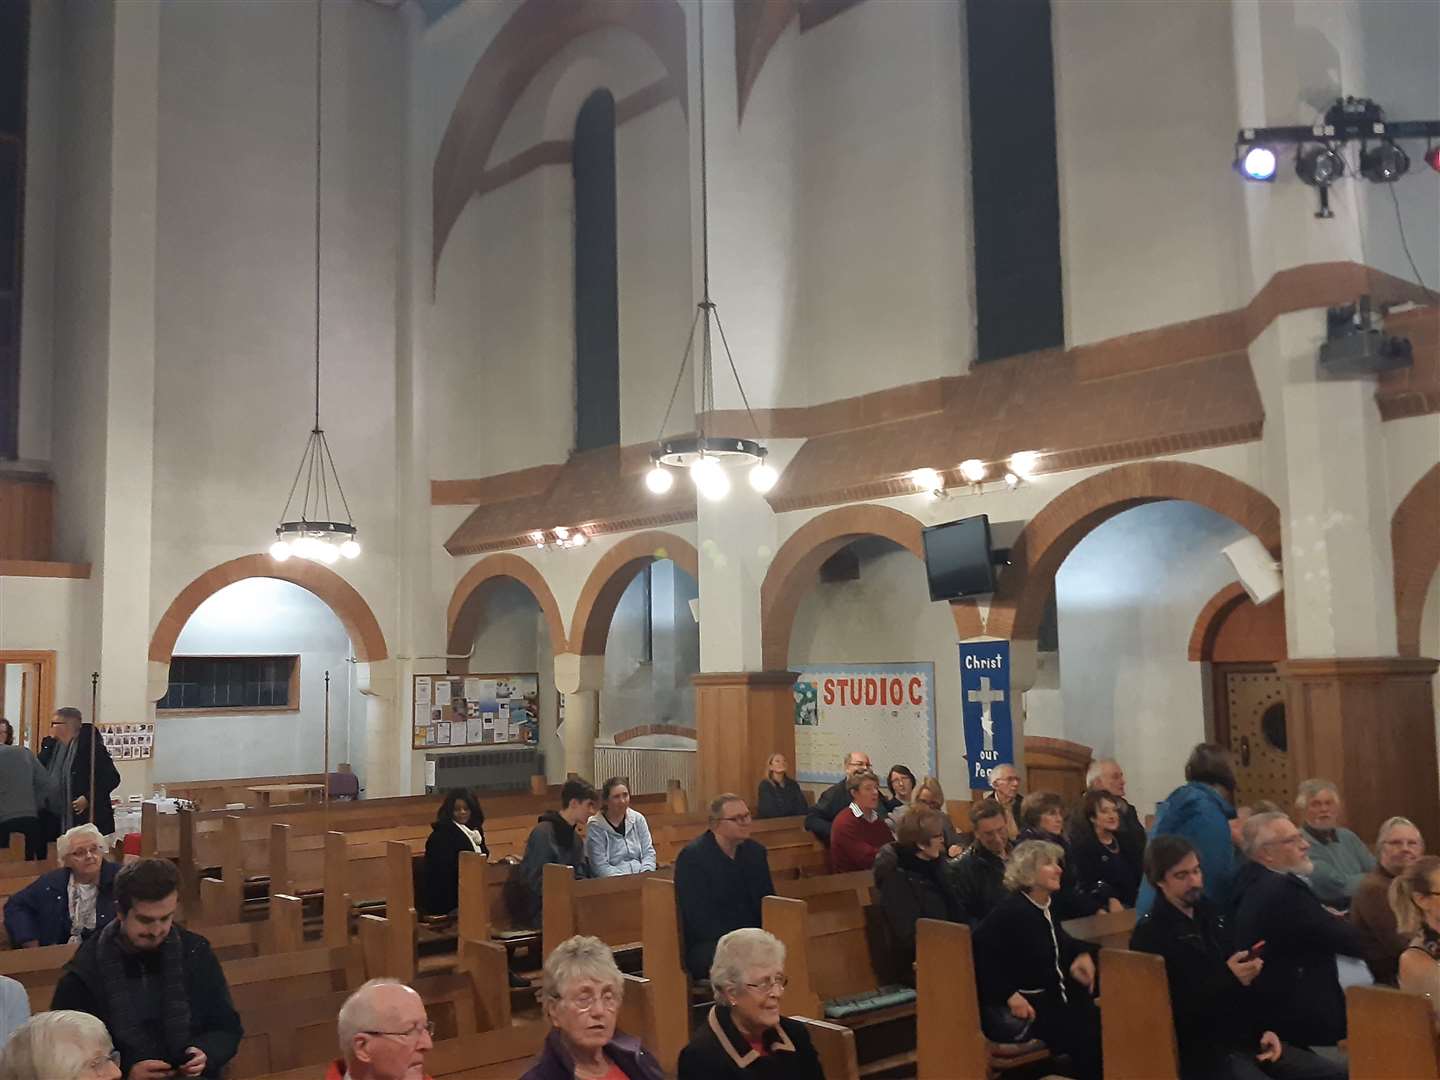 Residents attended the Question Time-style event which took place inside the church.